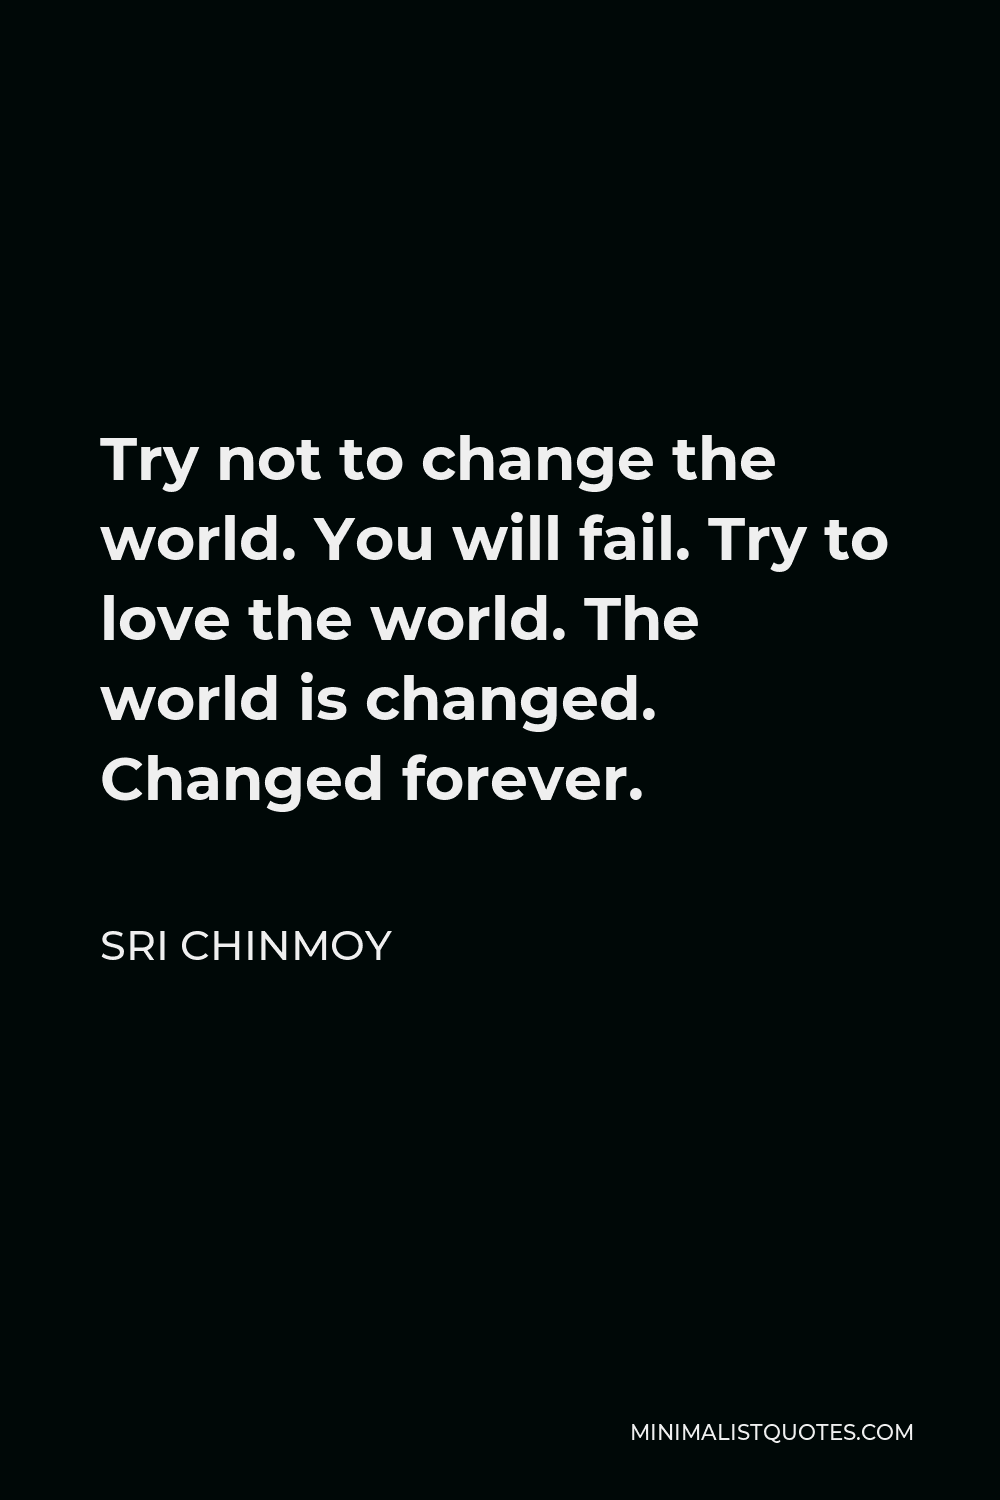 Sri Chinmoy Quote - Try not to change the world. You will fail. Try to love the world. The world is changed. Changed forever.